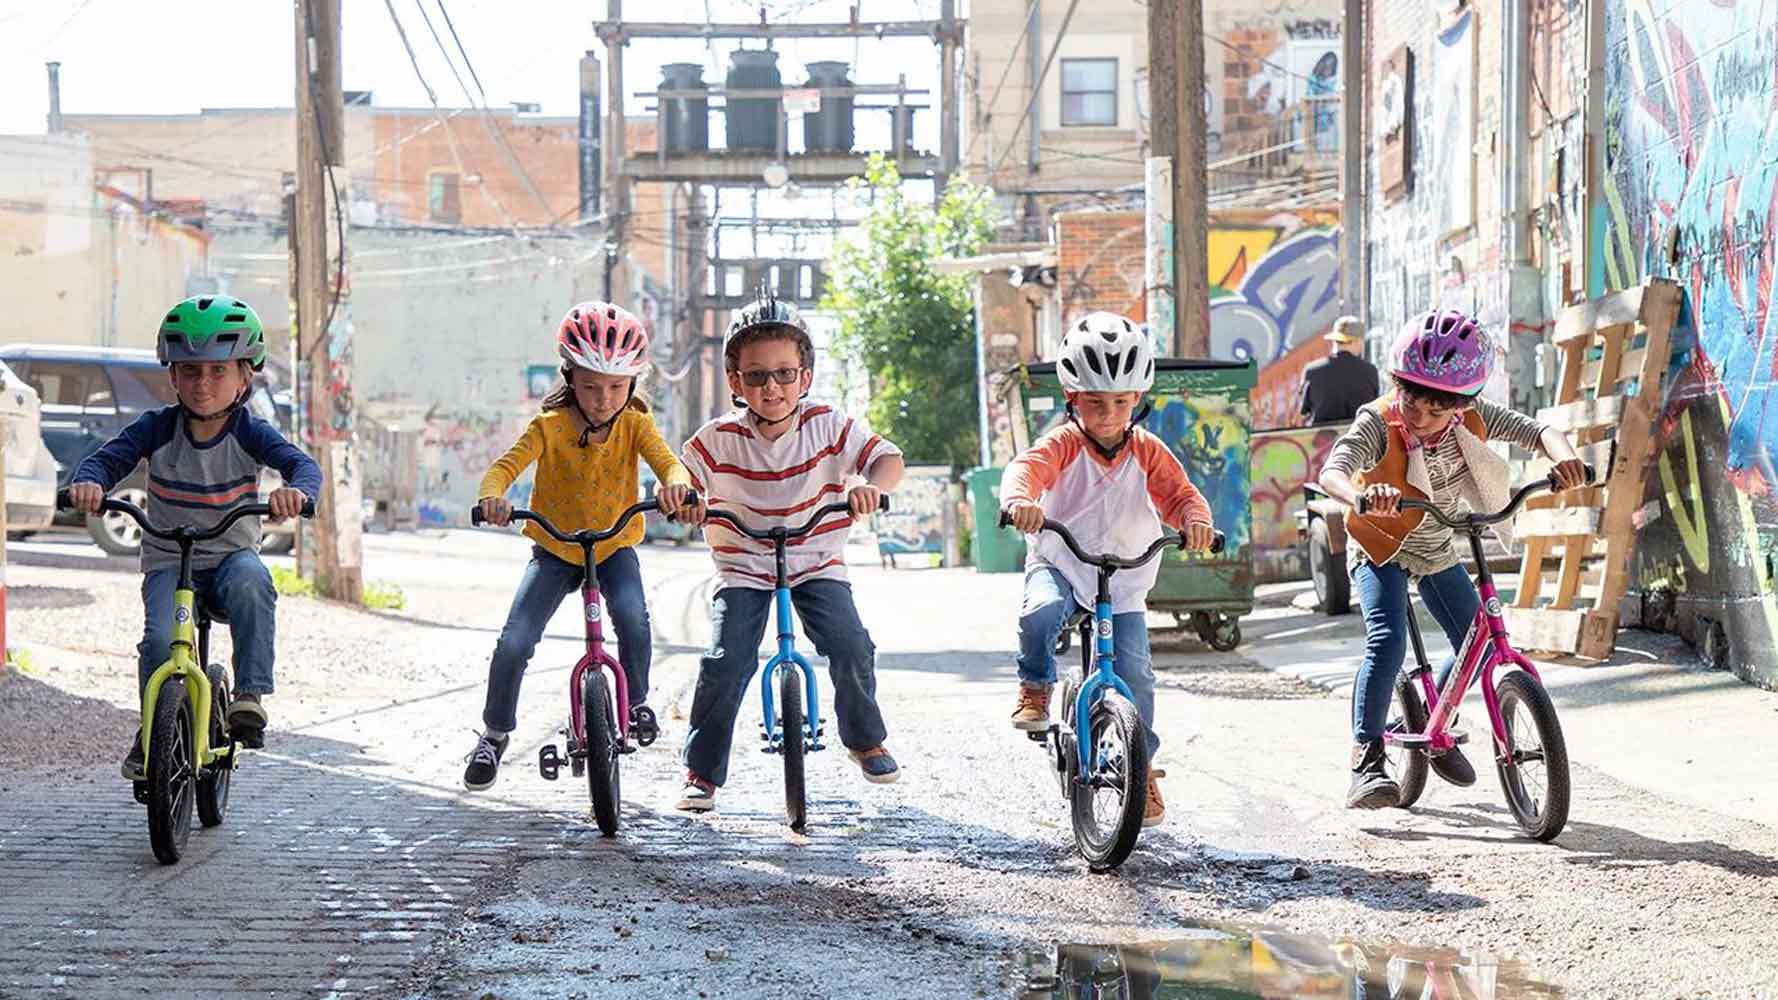 Use the Ready, Set, Pedal kid bike size chart to find the right size bike for your kid.